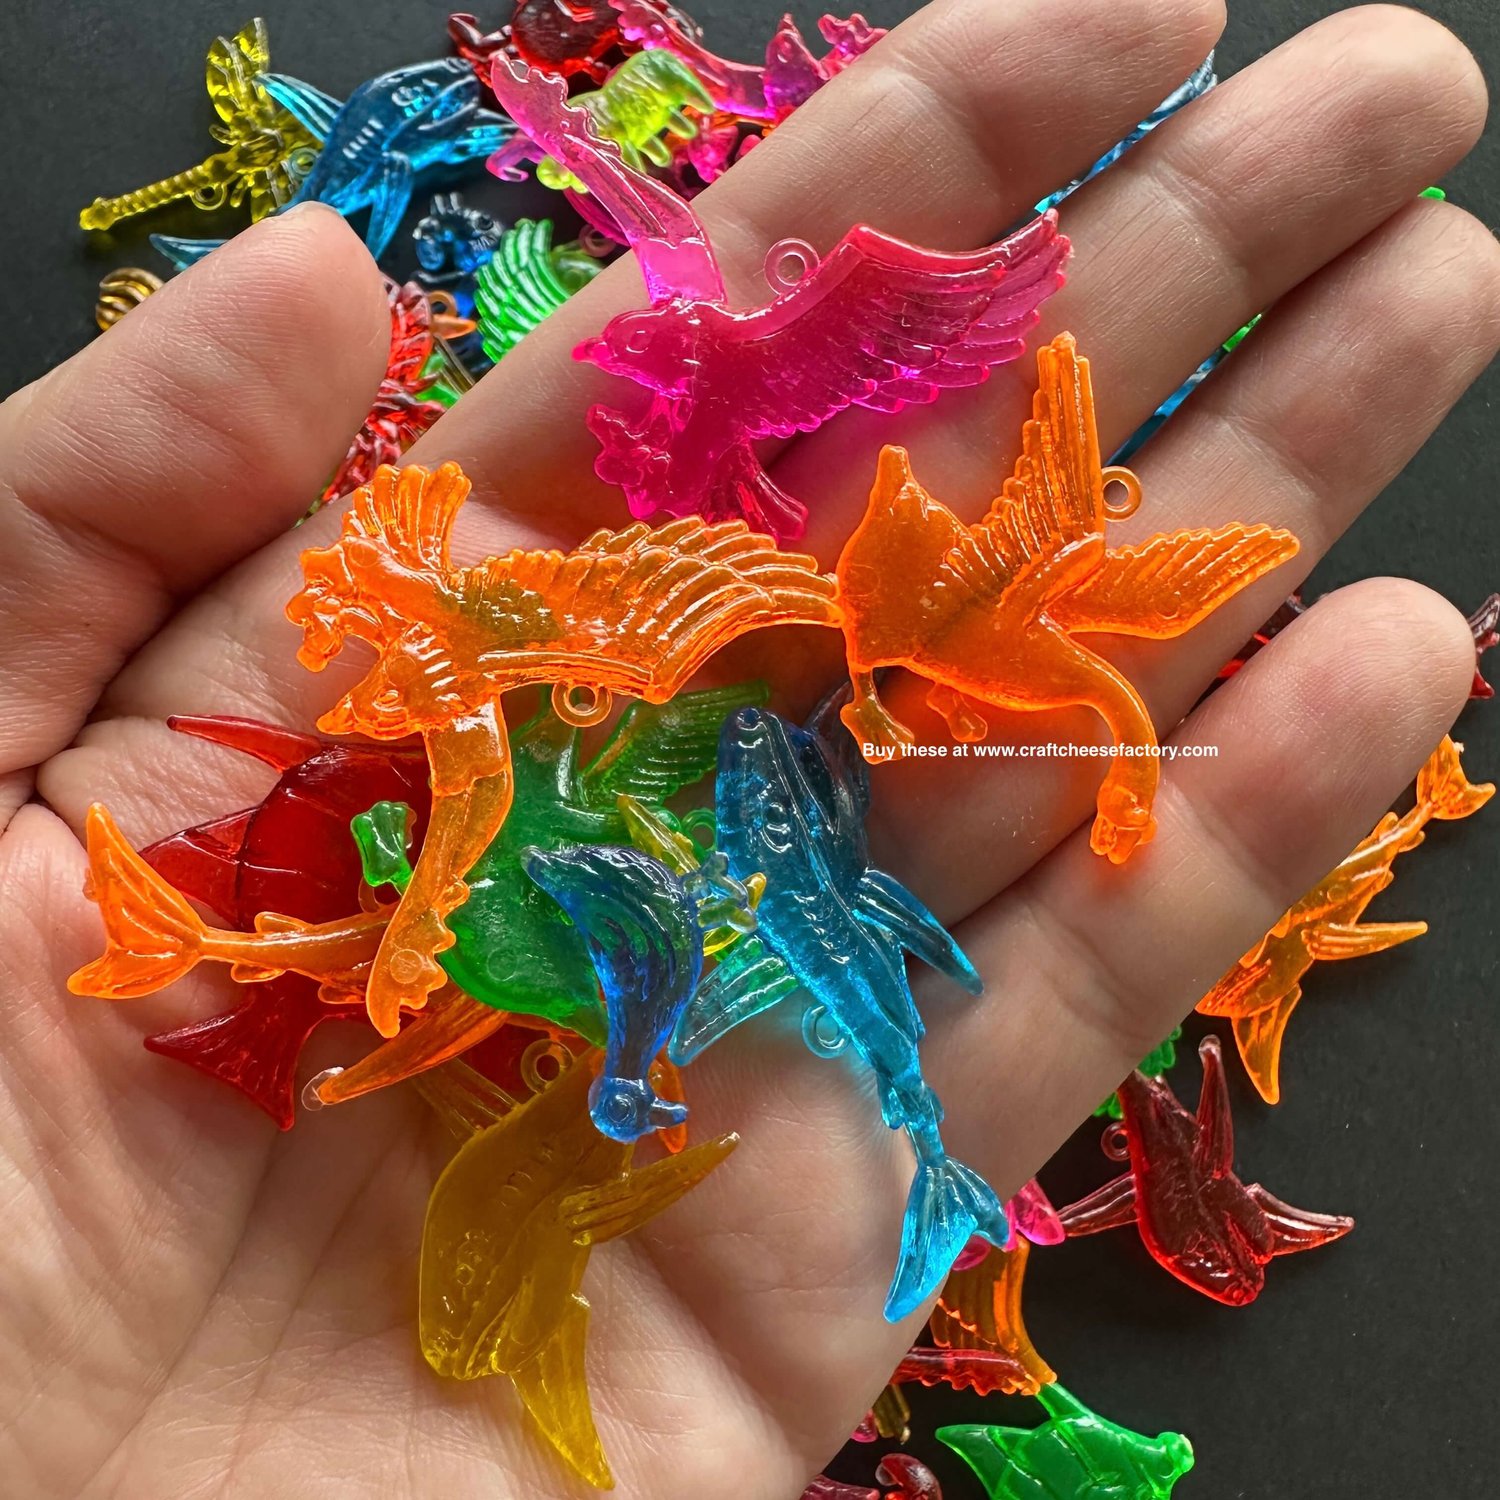 Vintage plastic toy charms dragons mythical creatures —